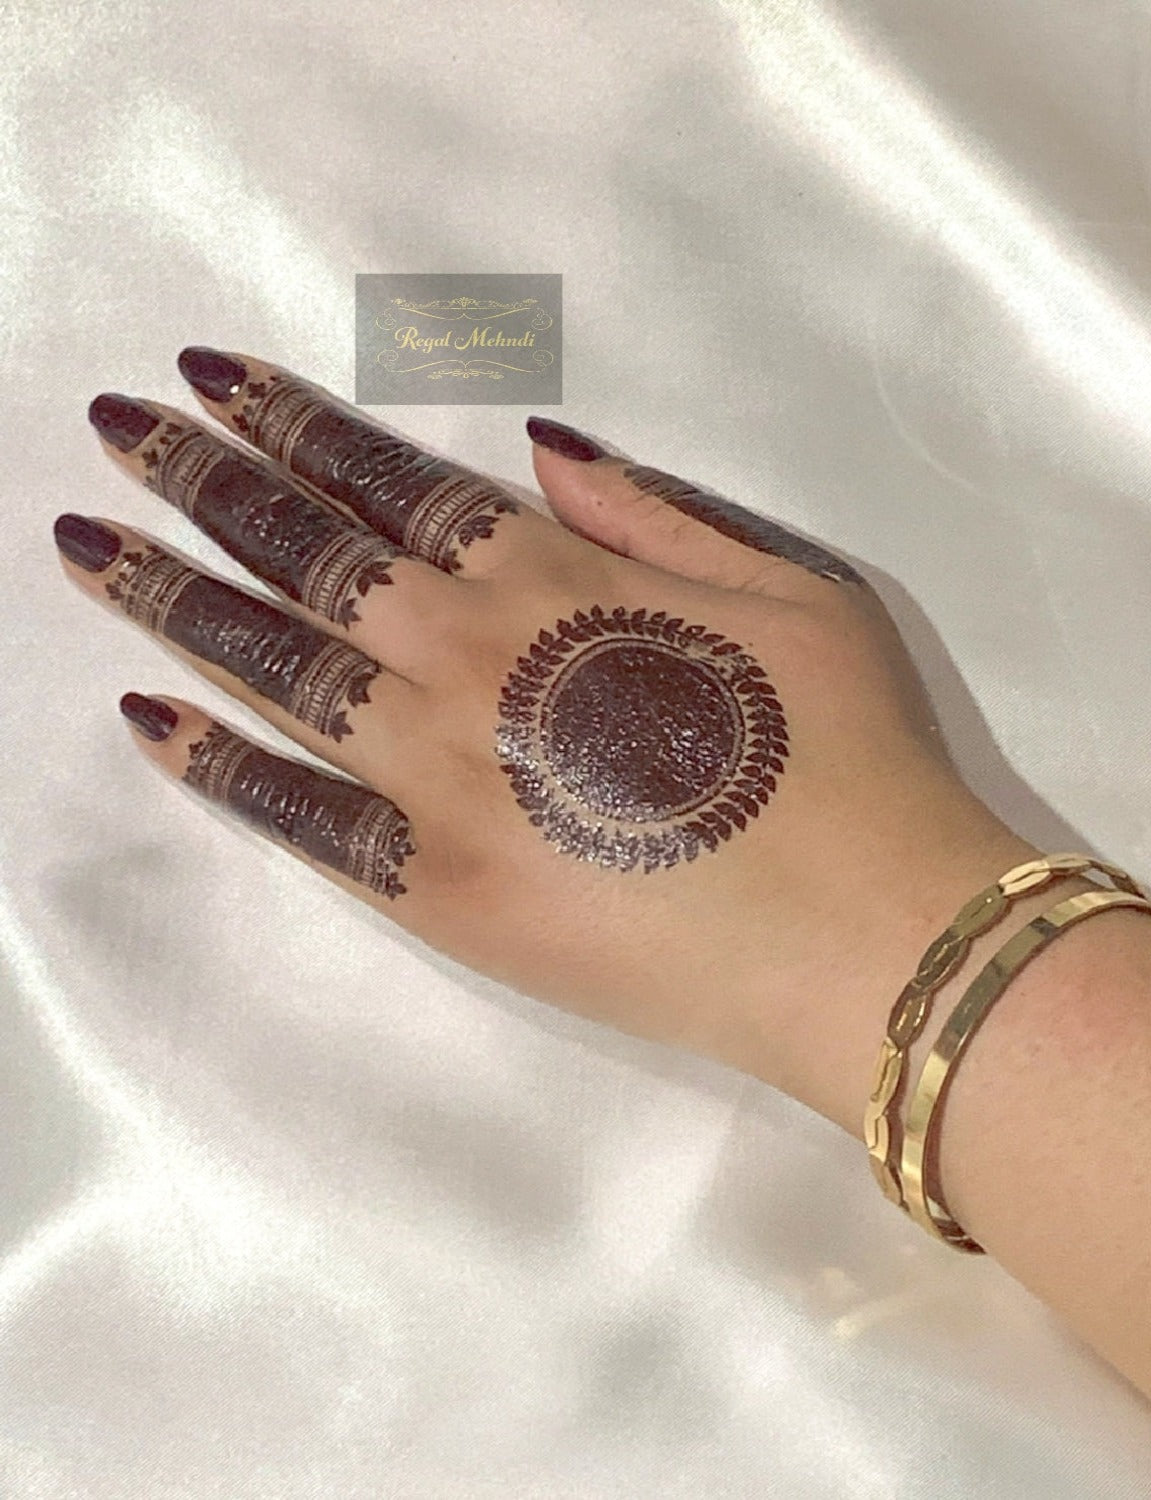 How to Remove Henna: 12 Ways to Get Rid of Henna from Your Skin